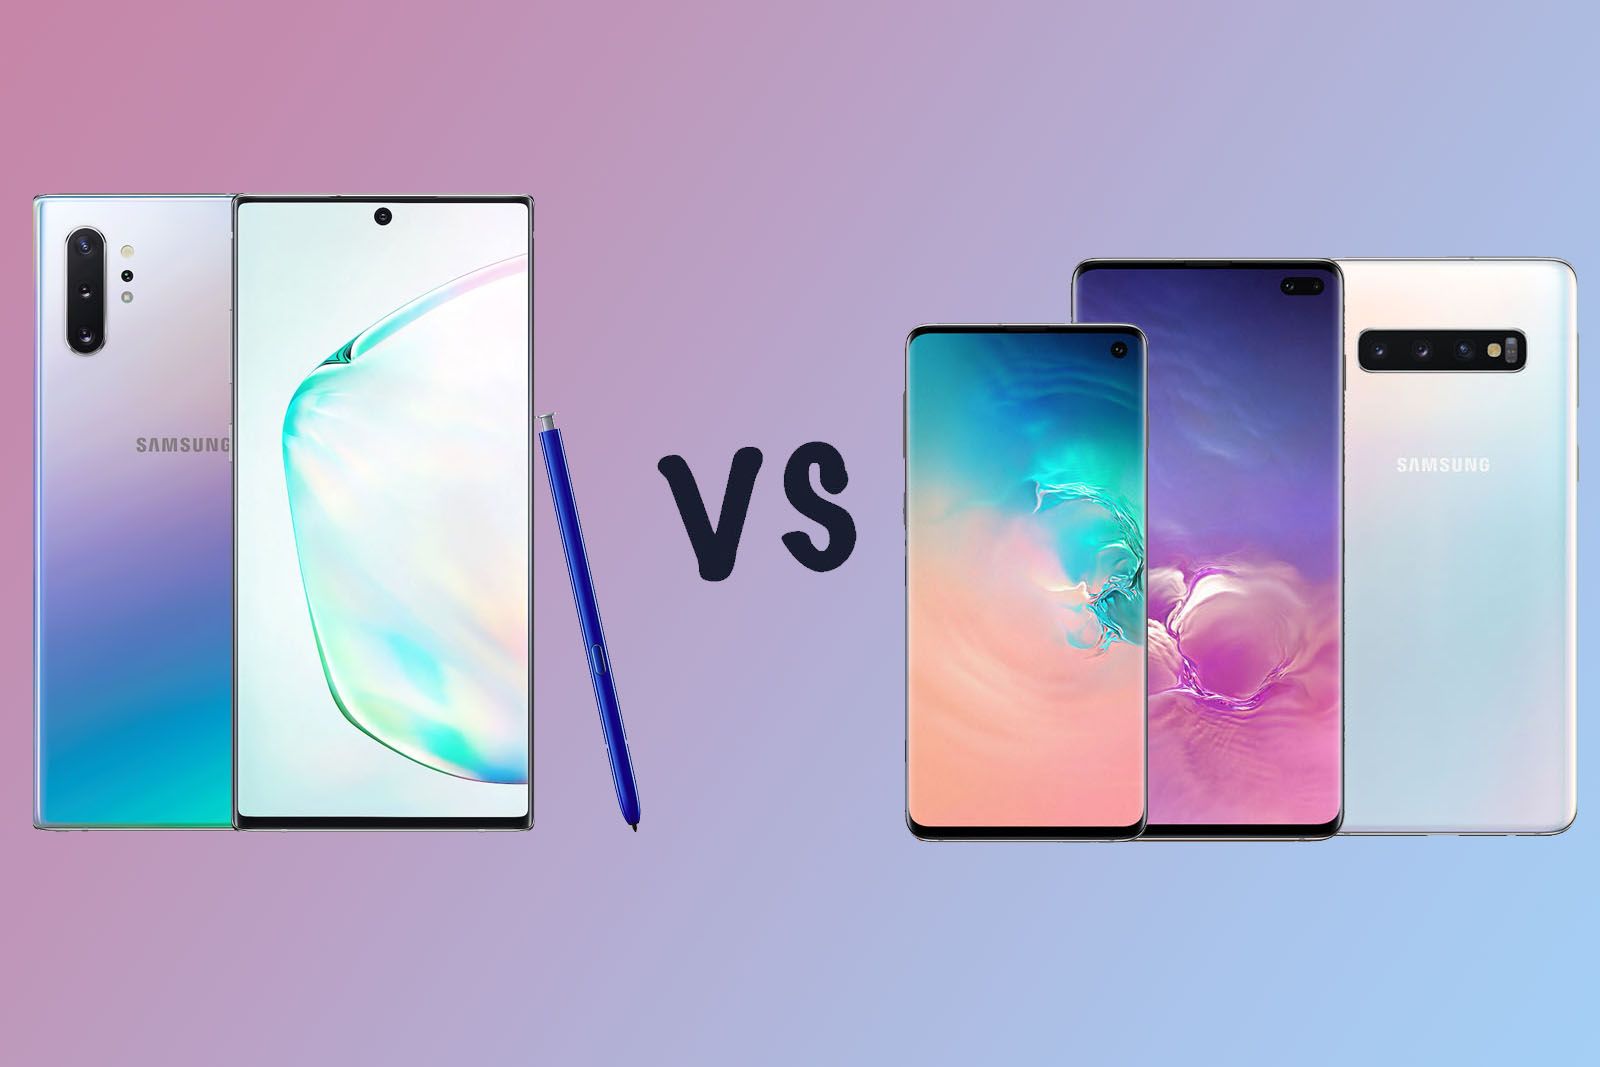 Samsung Galaxy Note 10 vs Galaxy S10 Whats the difference image 1